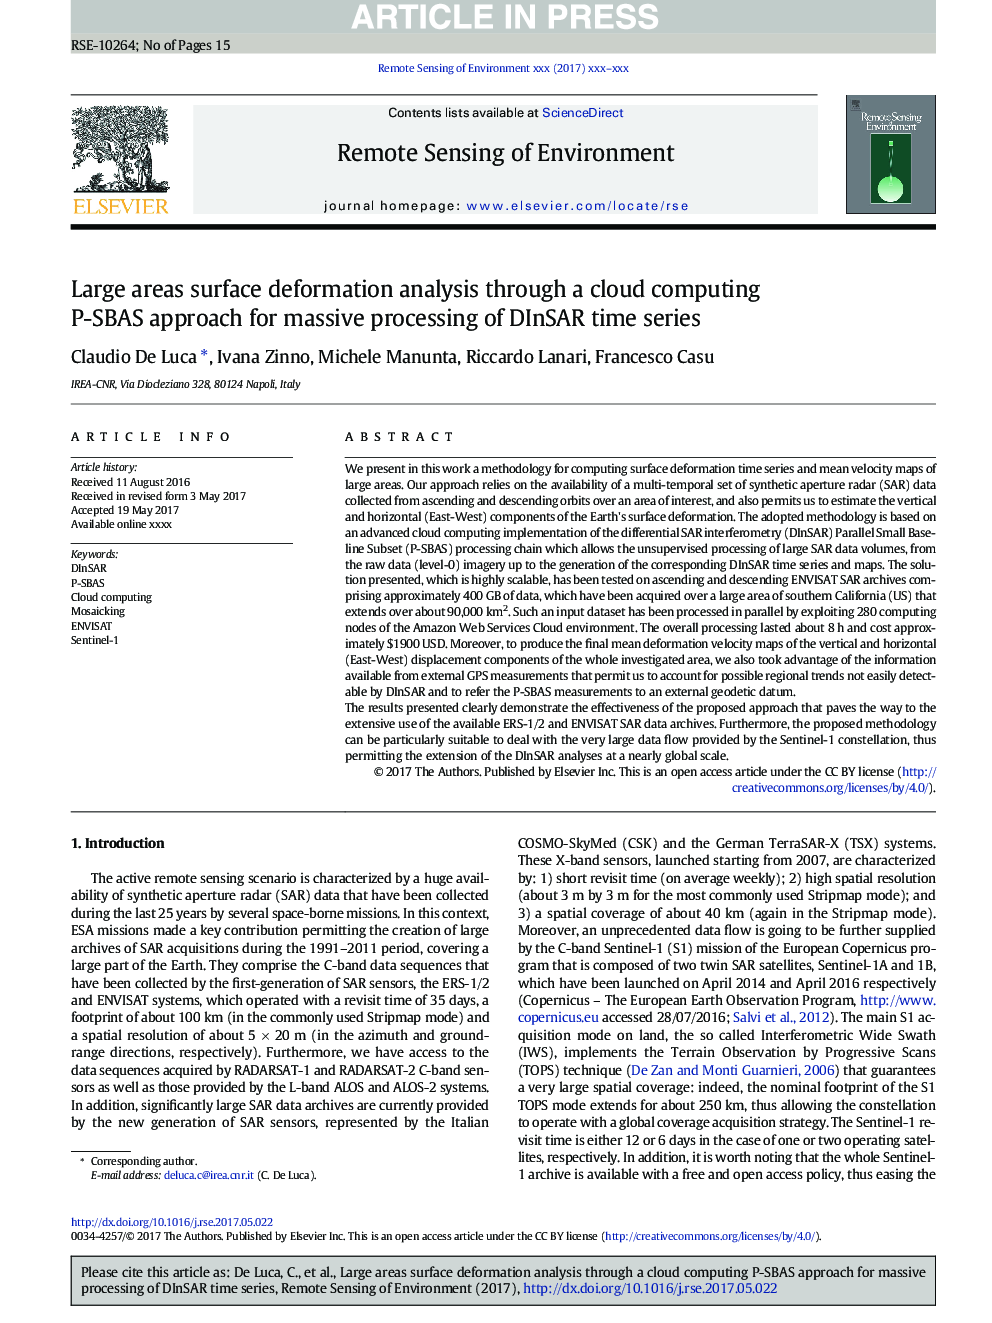 Large areas surface deformation analysis through a cloud computing P-SBAS approach for massive processing of DInSAR time series